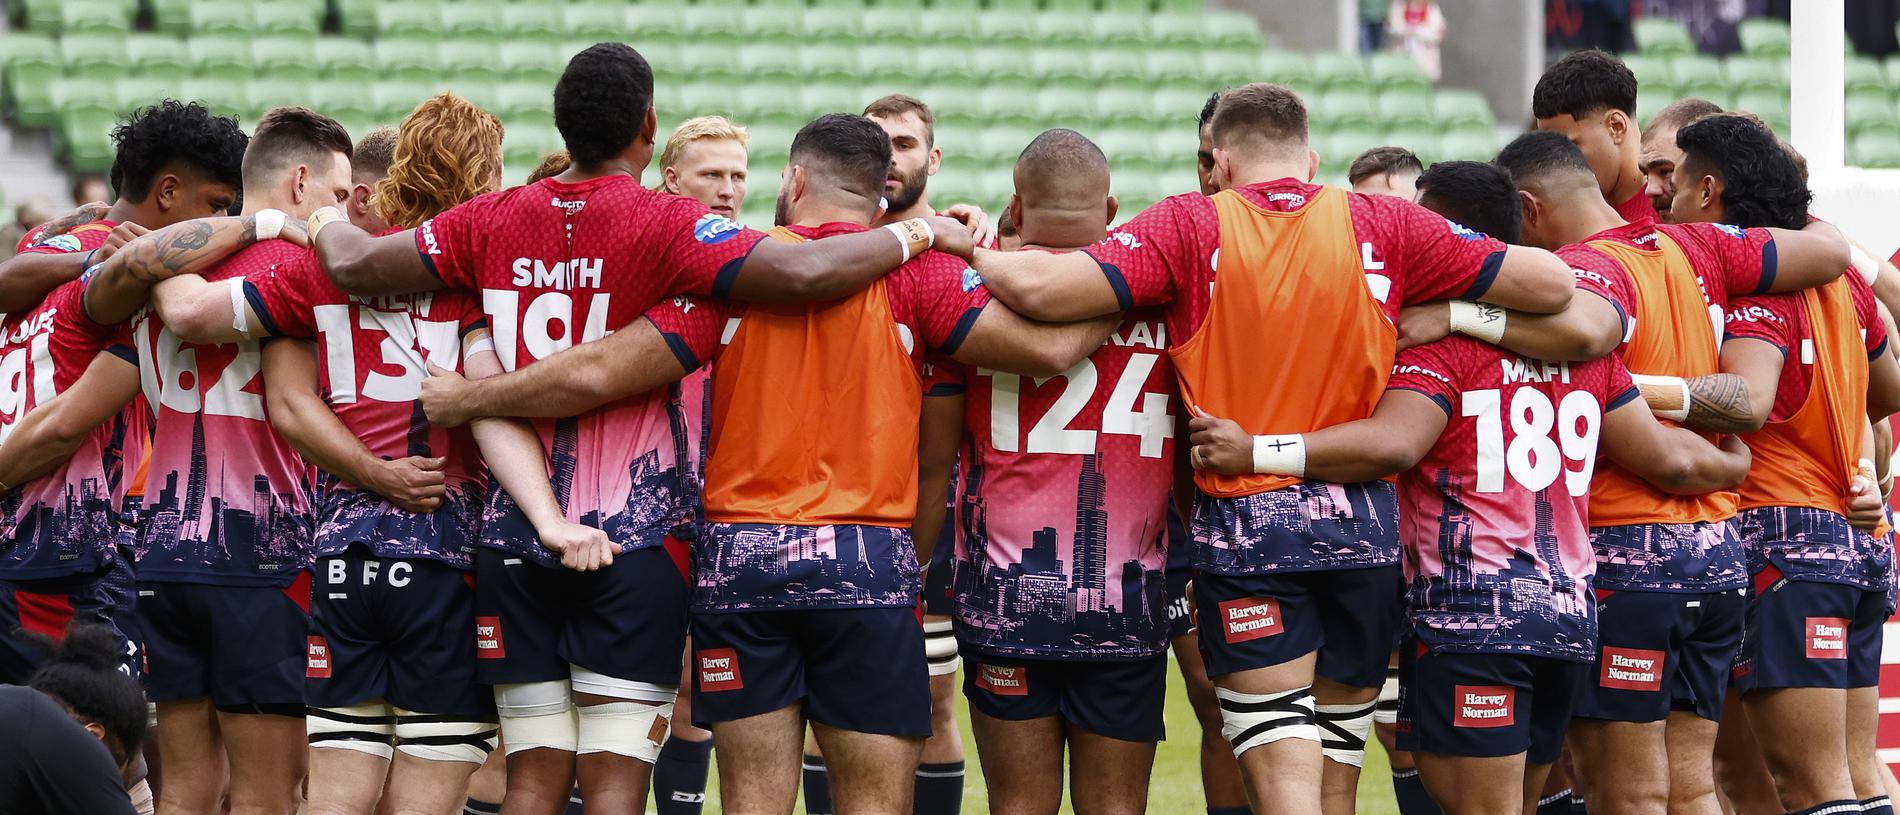 MELBOURNE, AUSTRALIA - MAY 07: The Rebels huddle before the round 11 Super Rugby Pacific match between Melbourne Rebels and ACT Brumbies at AAMI Park, on May 07, 2023, in Melbourne, Australia. (Photo by Daniel Pockett/Getty Images)